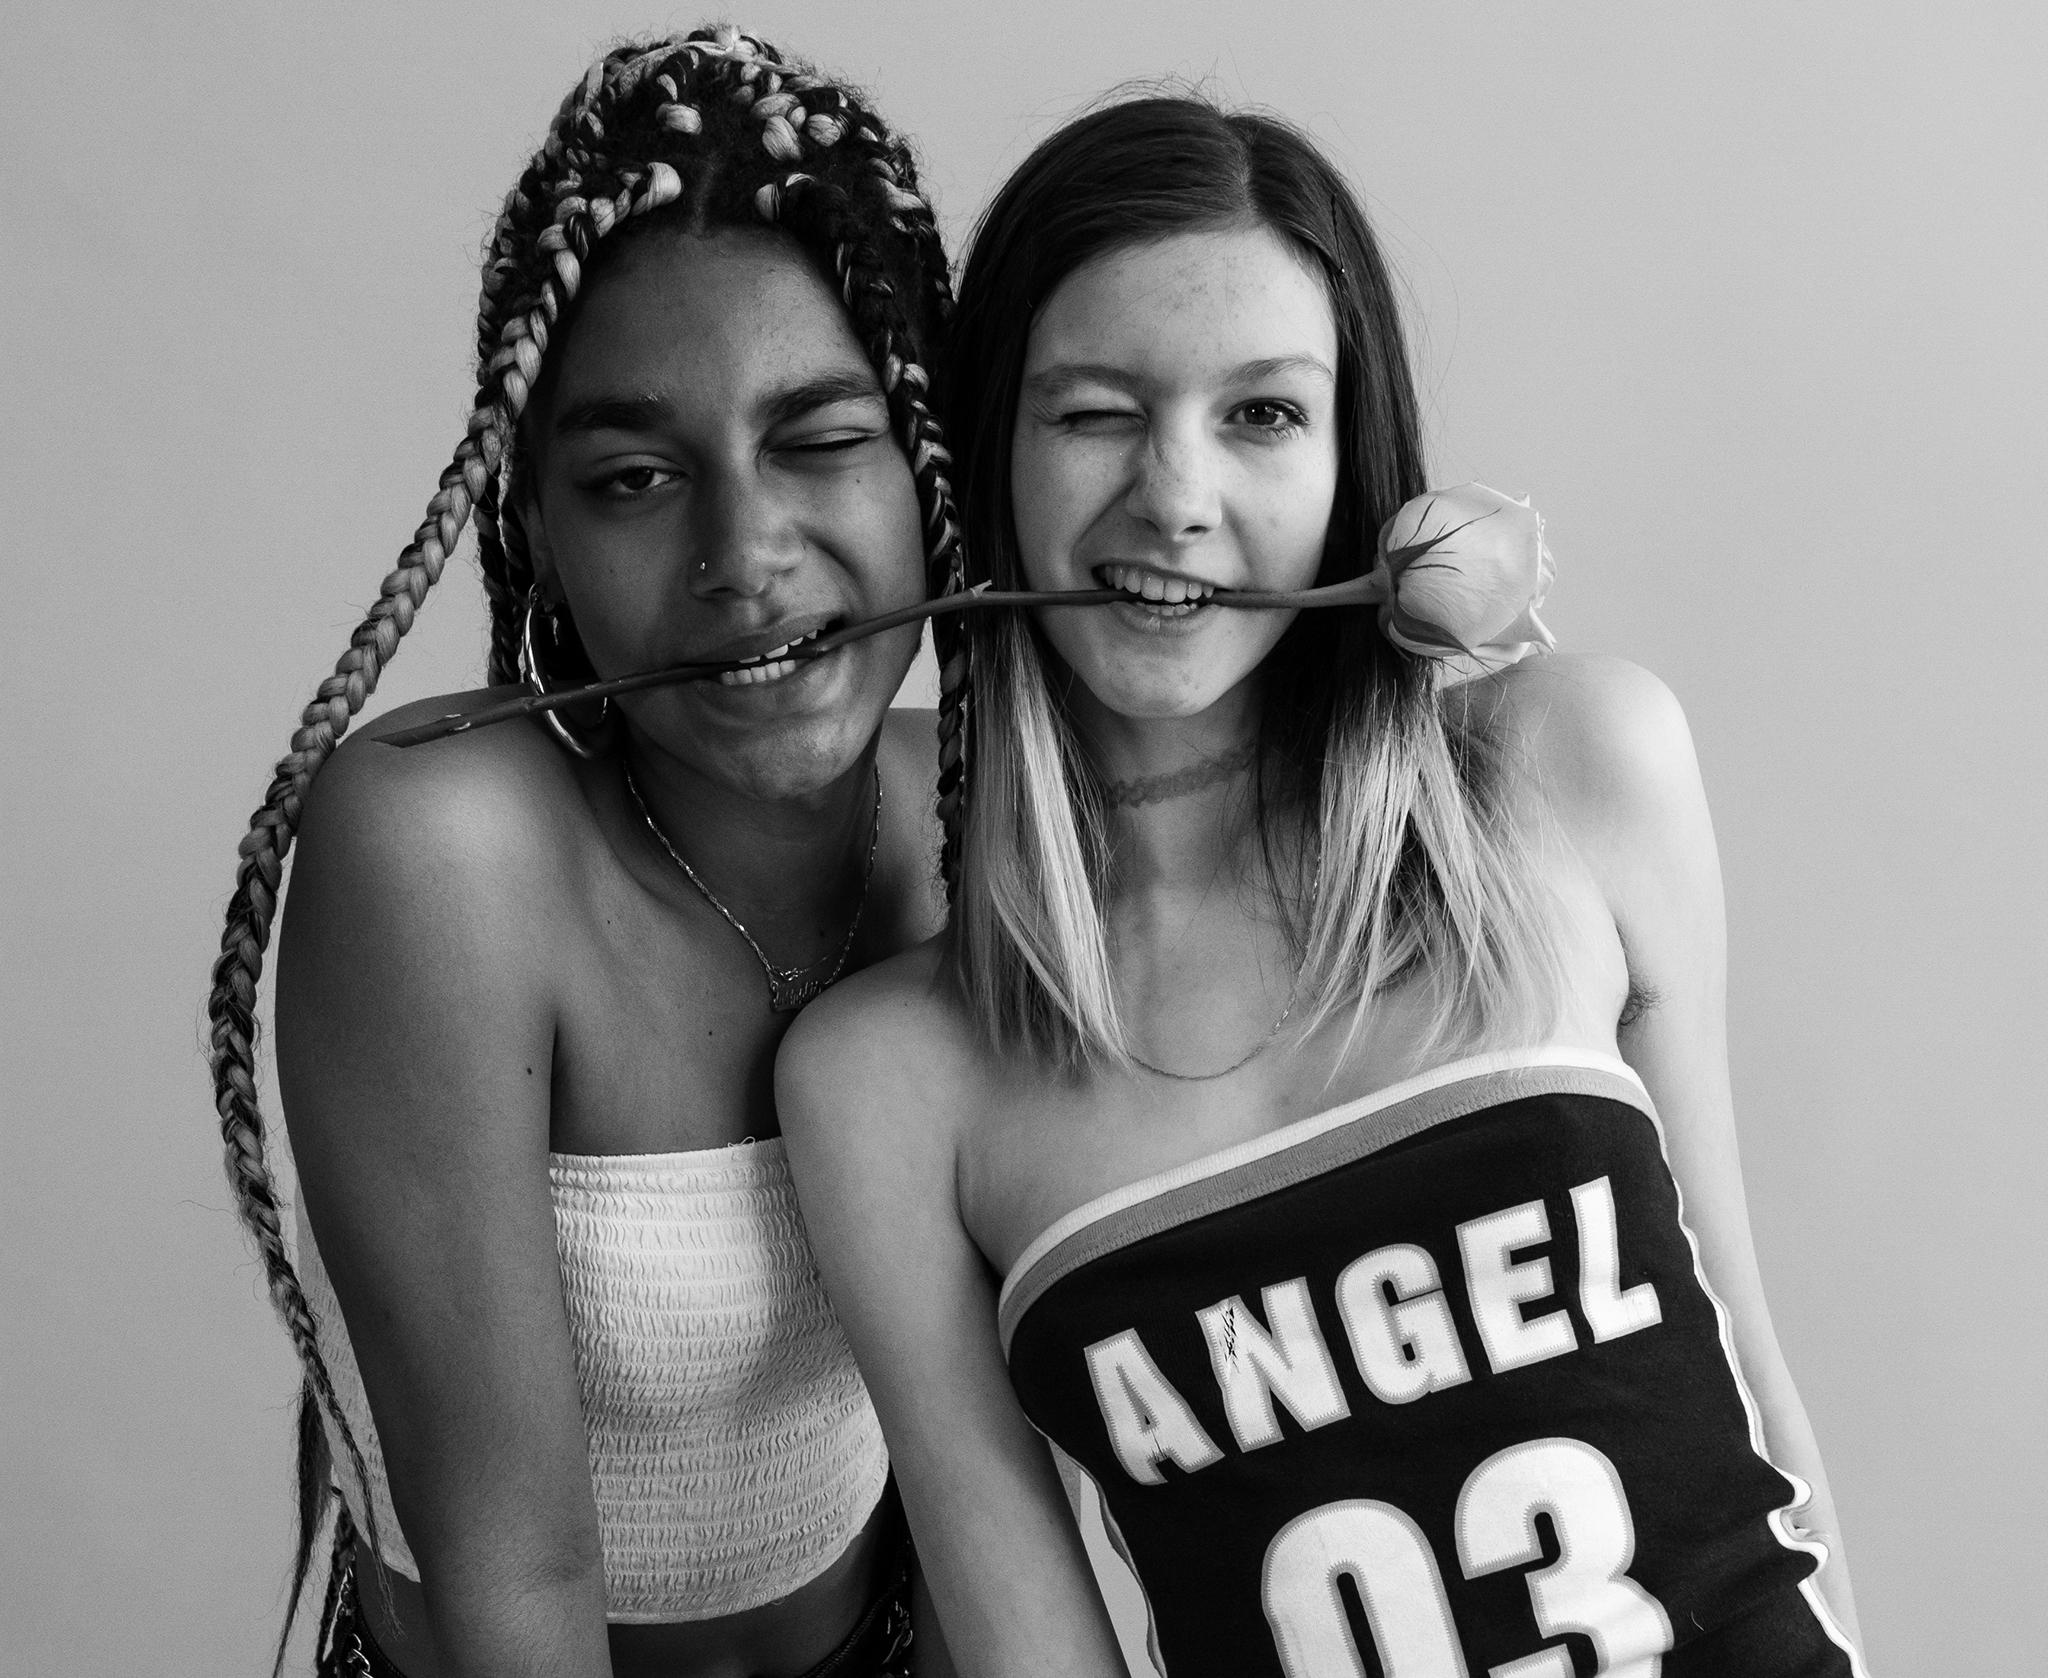 New York's Queer Youth project